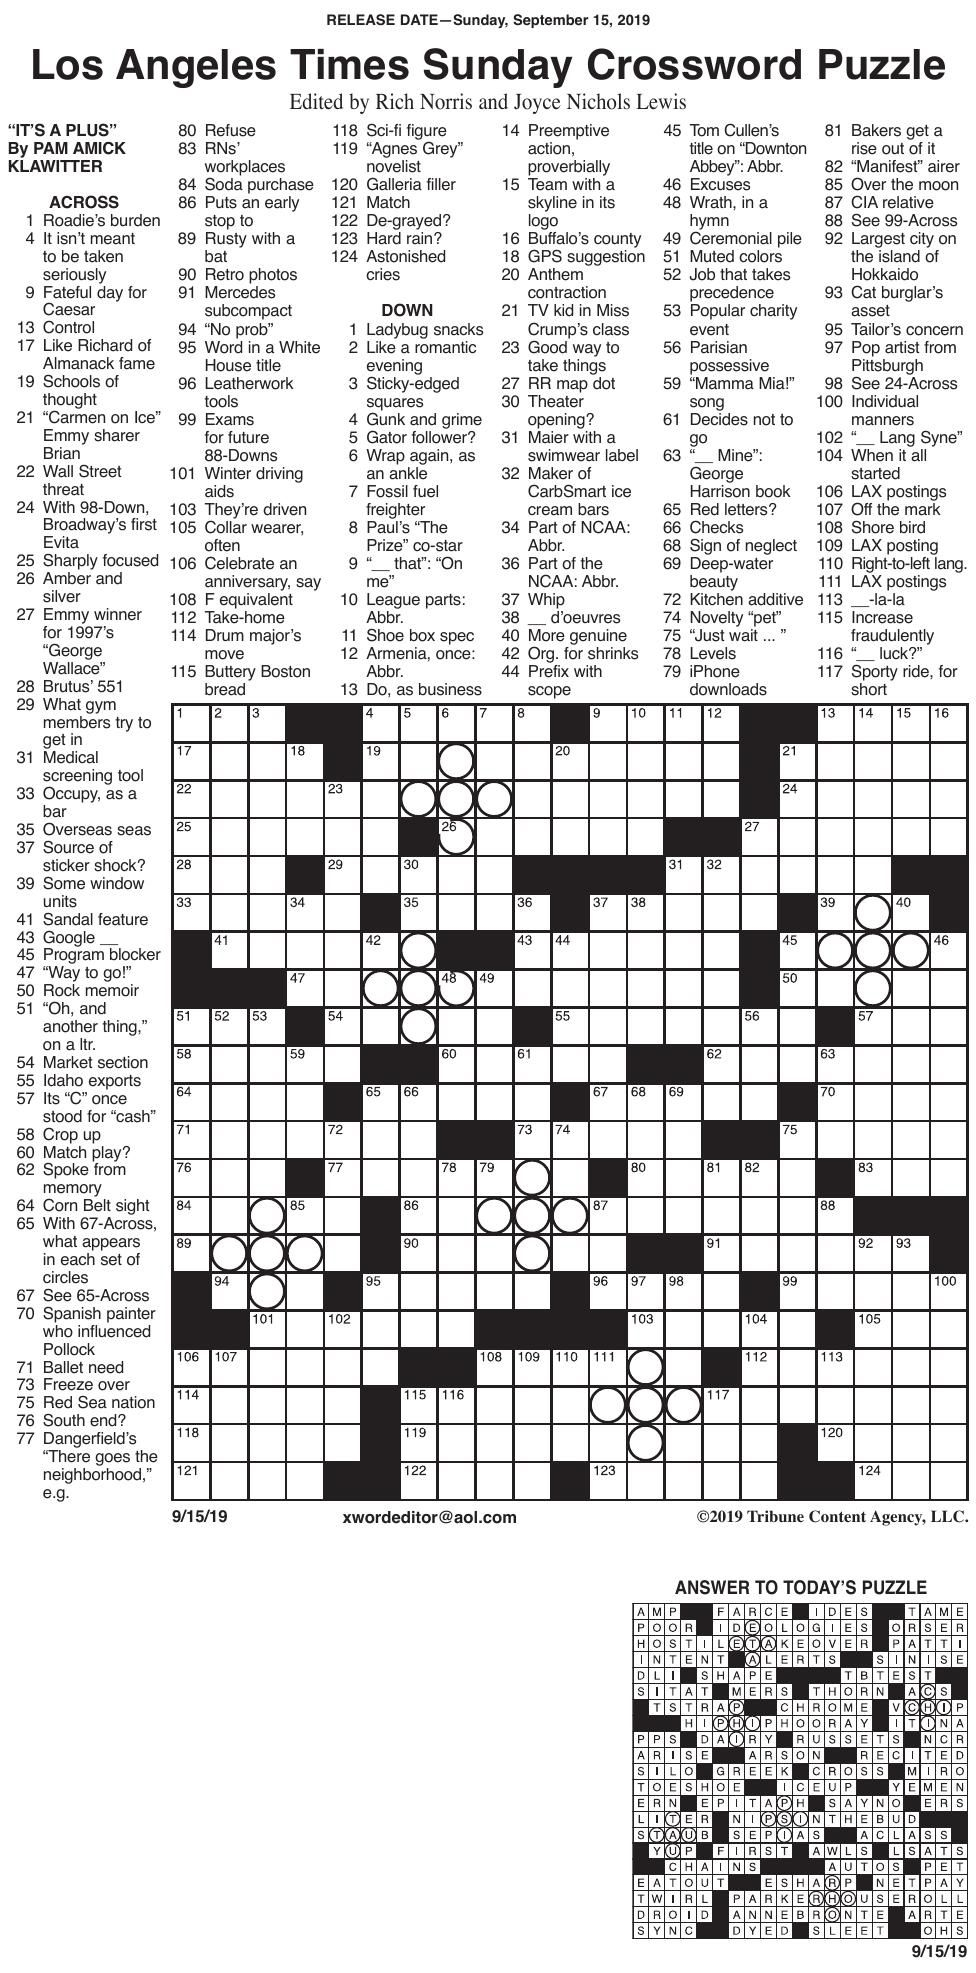 Free Printable L A Times Crossword Puzzles | Printable Crossword Puzzles, Bingo Cards, Forms